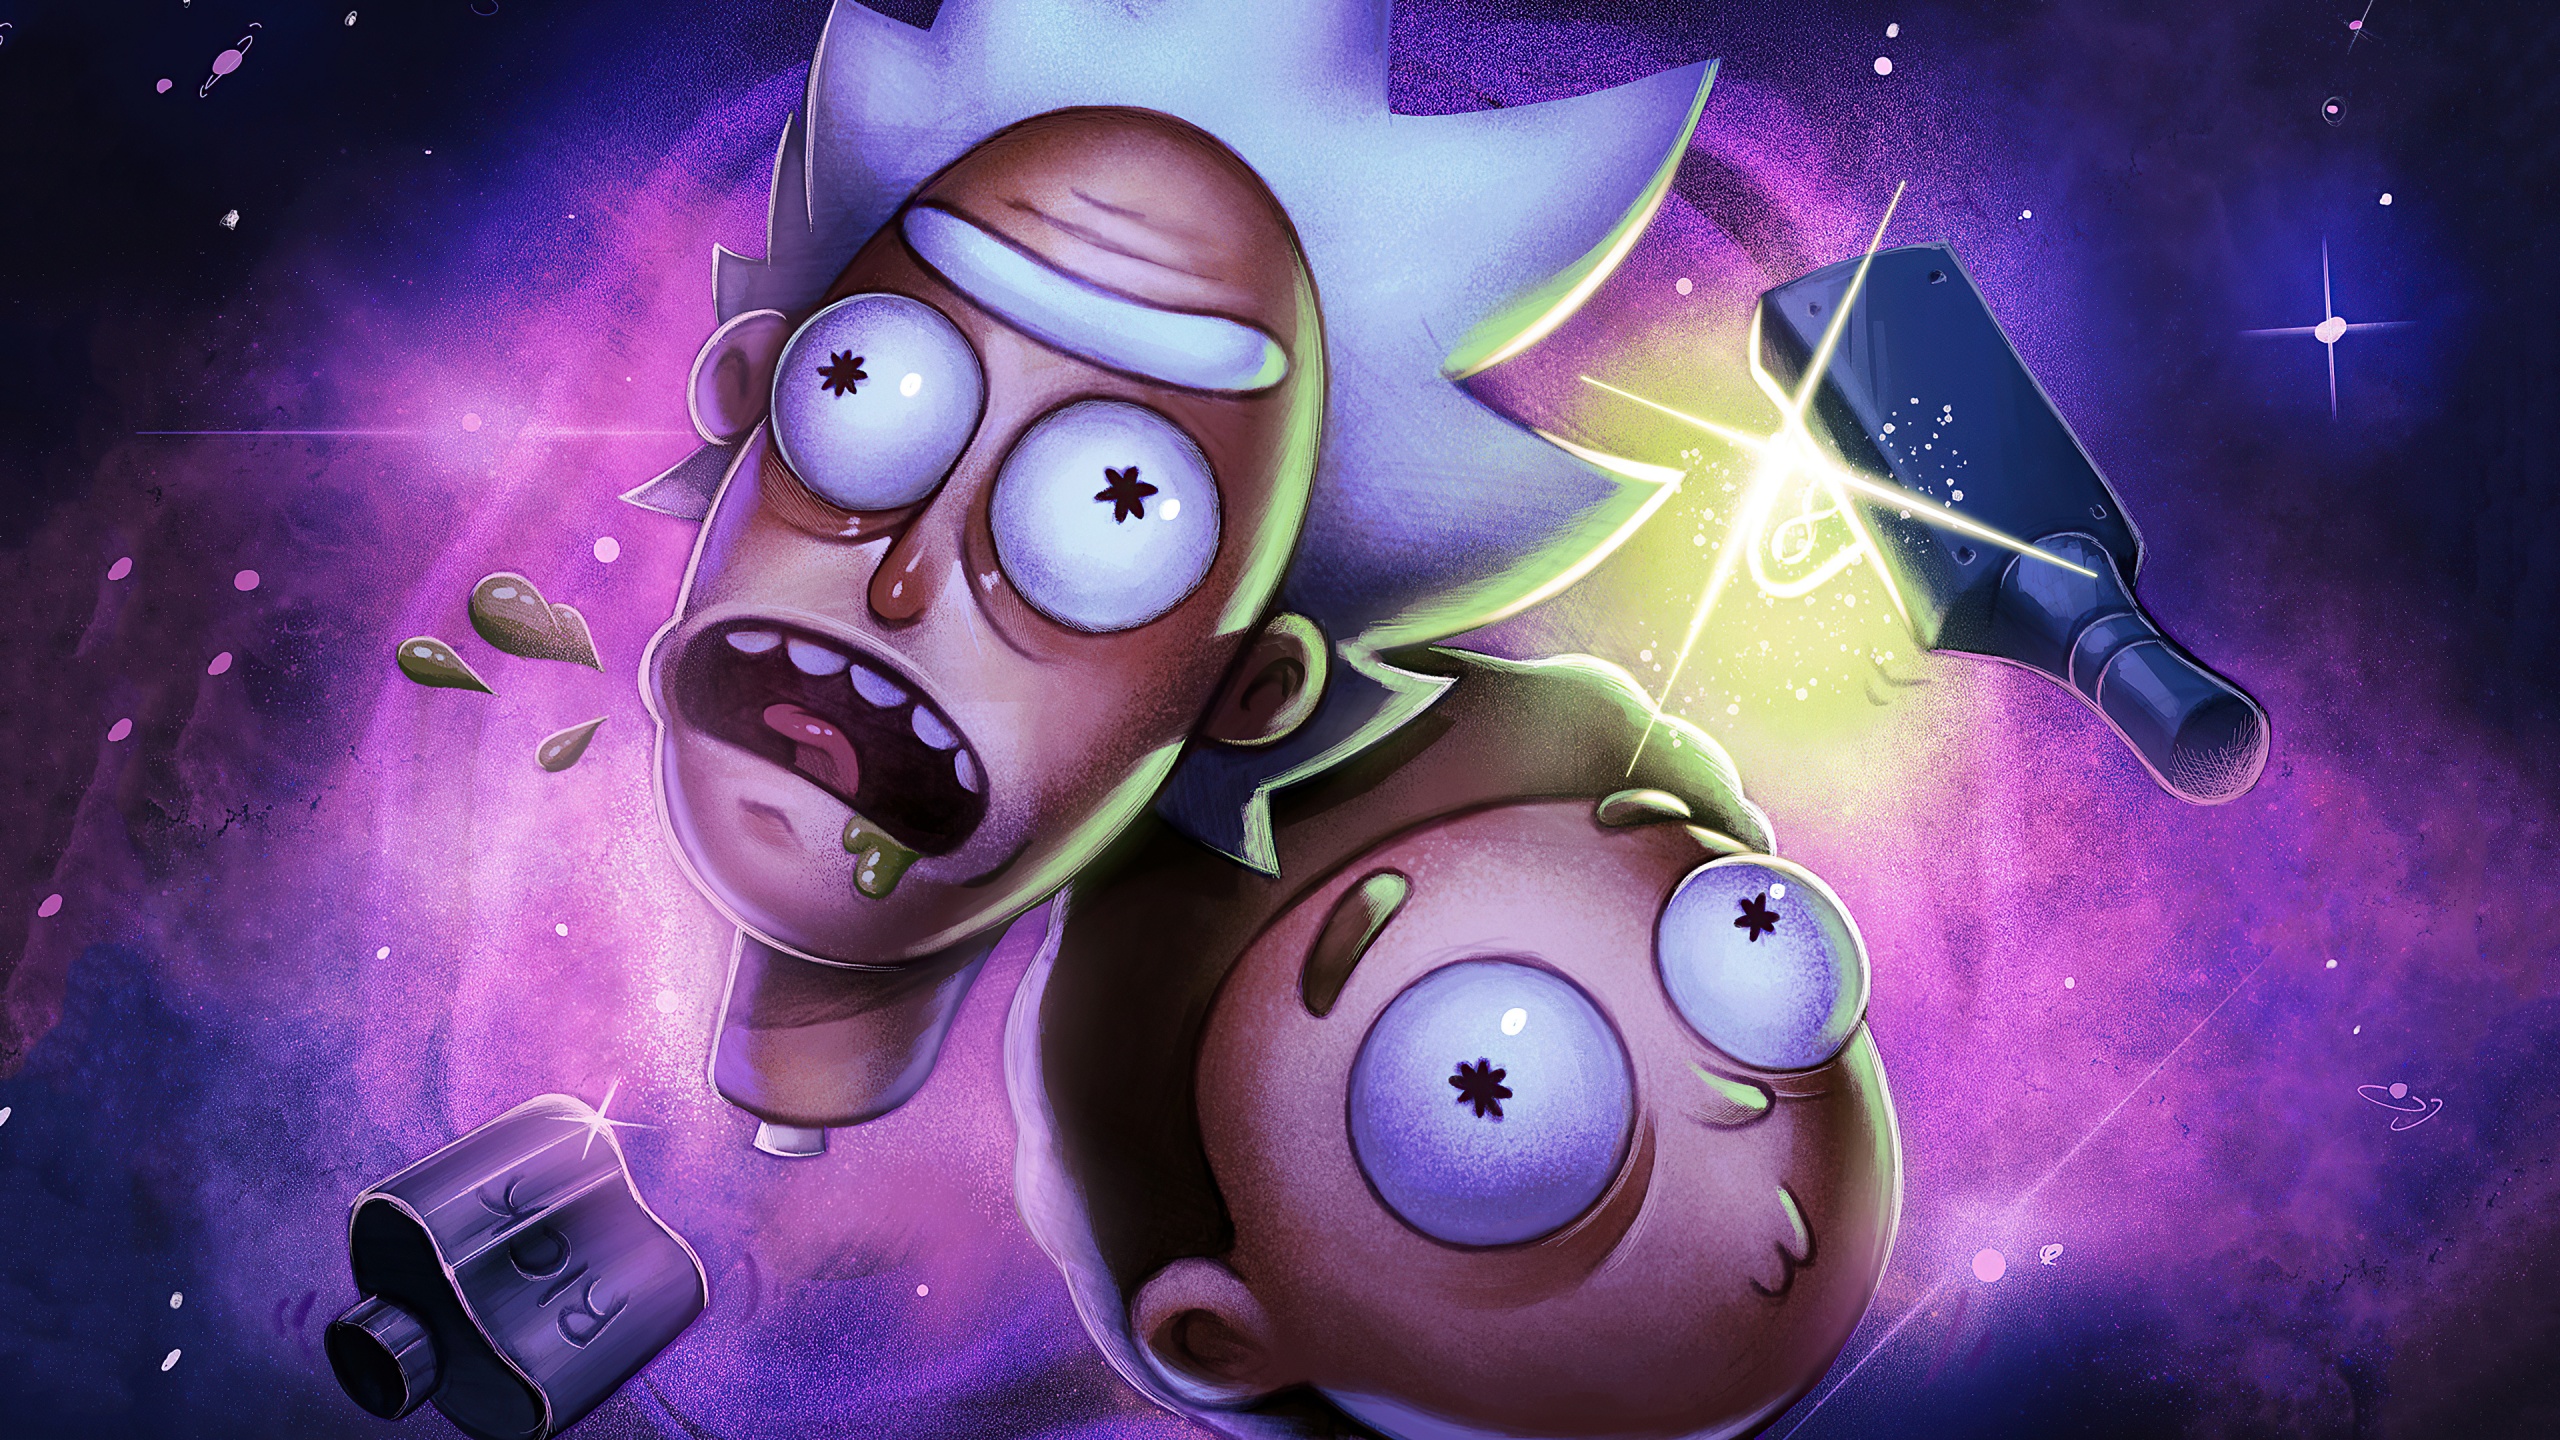 Rick and Morty Wallpaper For Mobile - Best Movie Poster Wallpaper